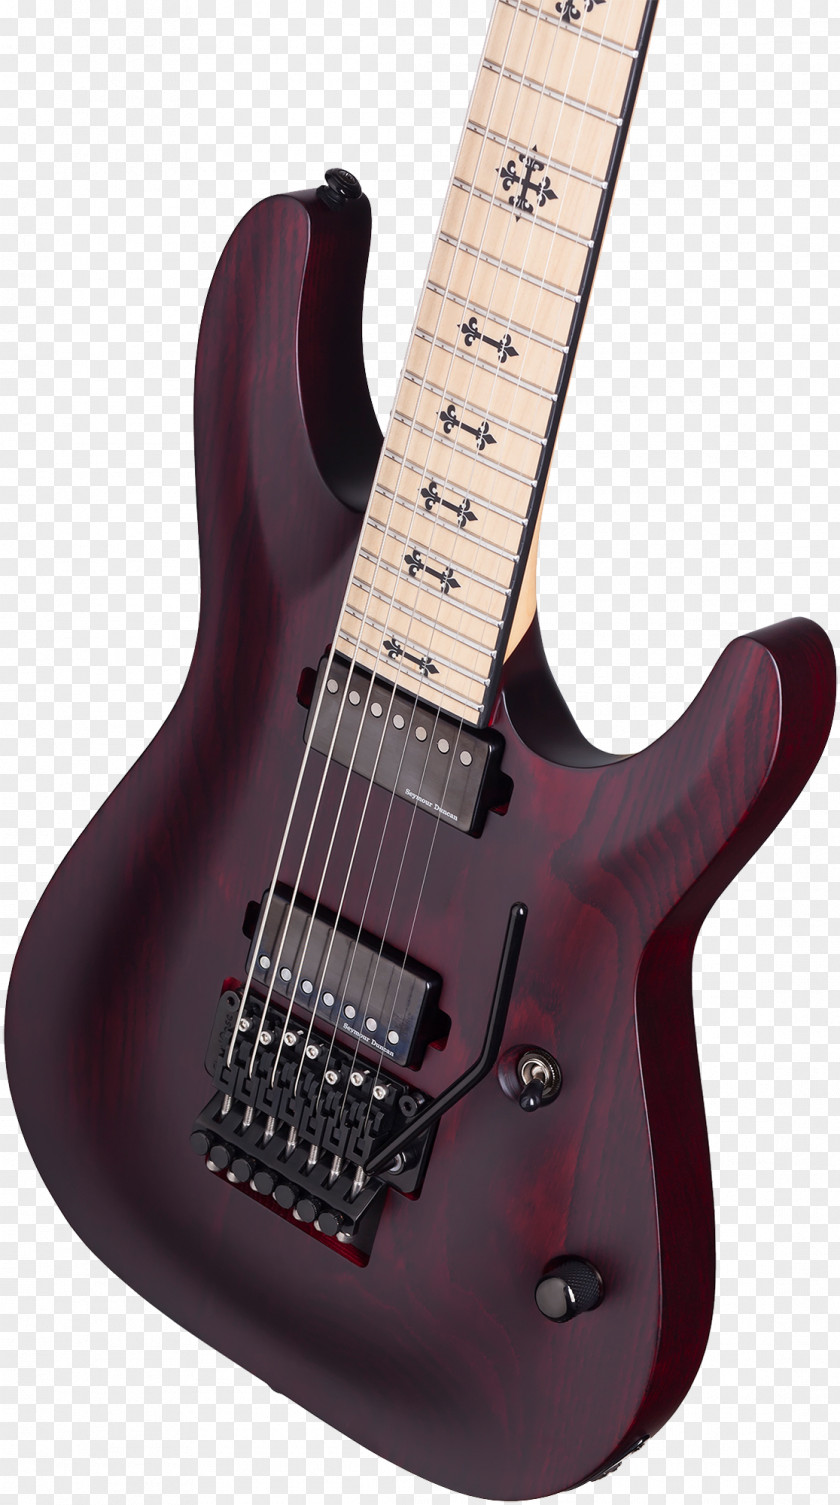 Red Satin Seven-string Guitar Electric Fingerboard Schecter Research PNG